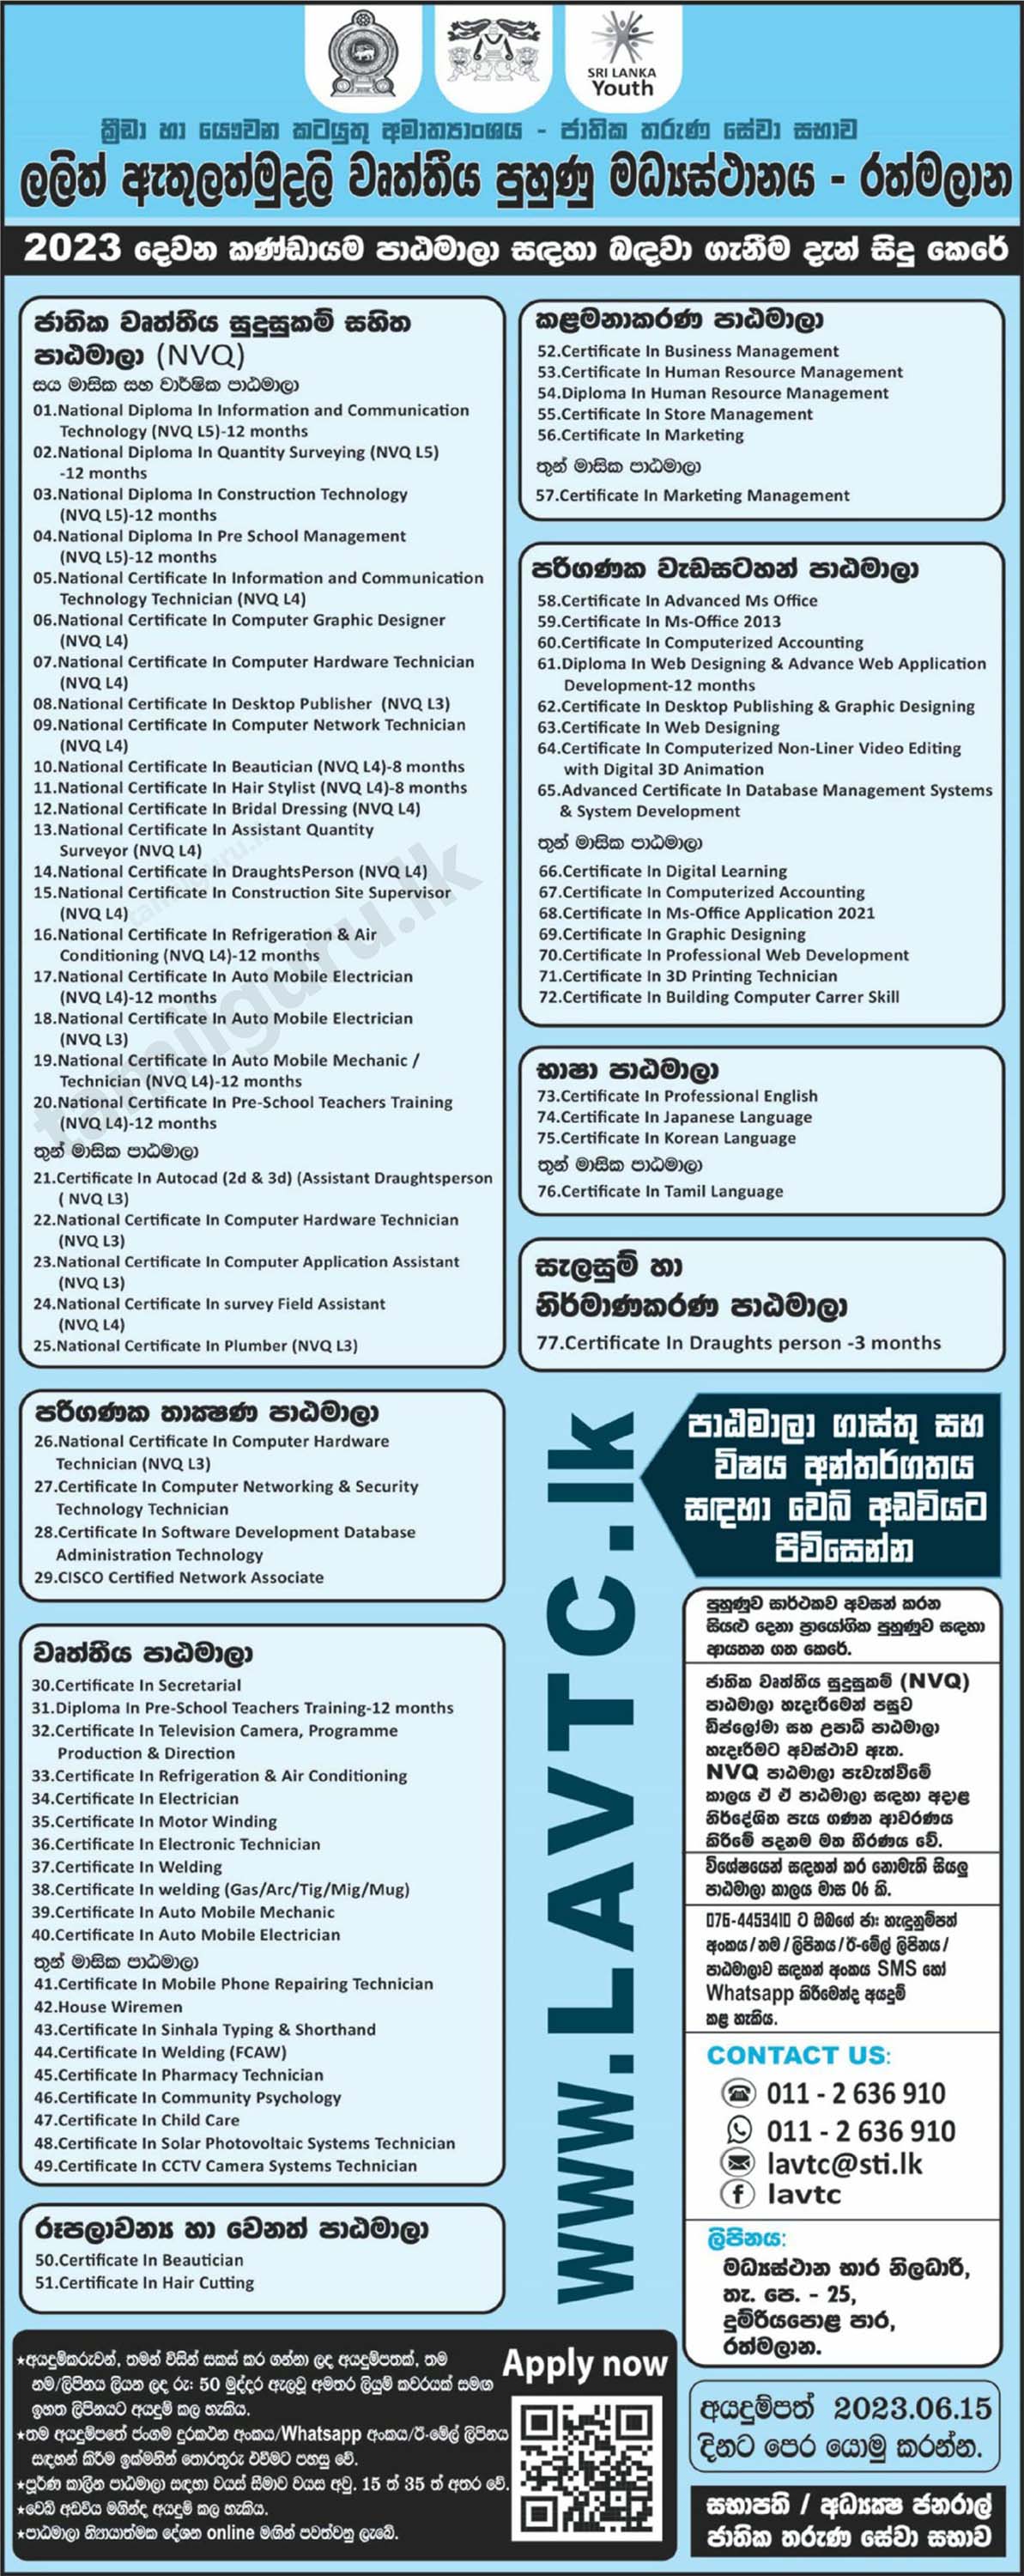 Admission for Courses (02nd Batch 2023)- Lalith Athulathmudali Vocational Training Center (LAVTC)